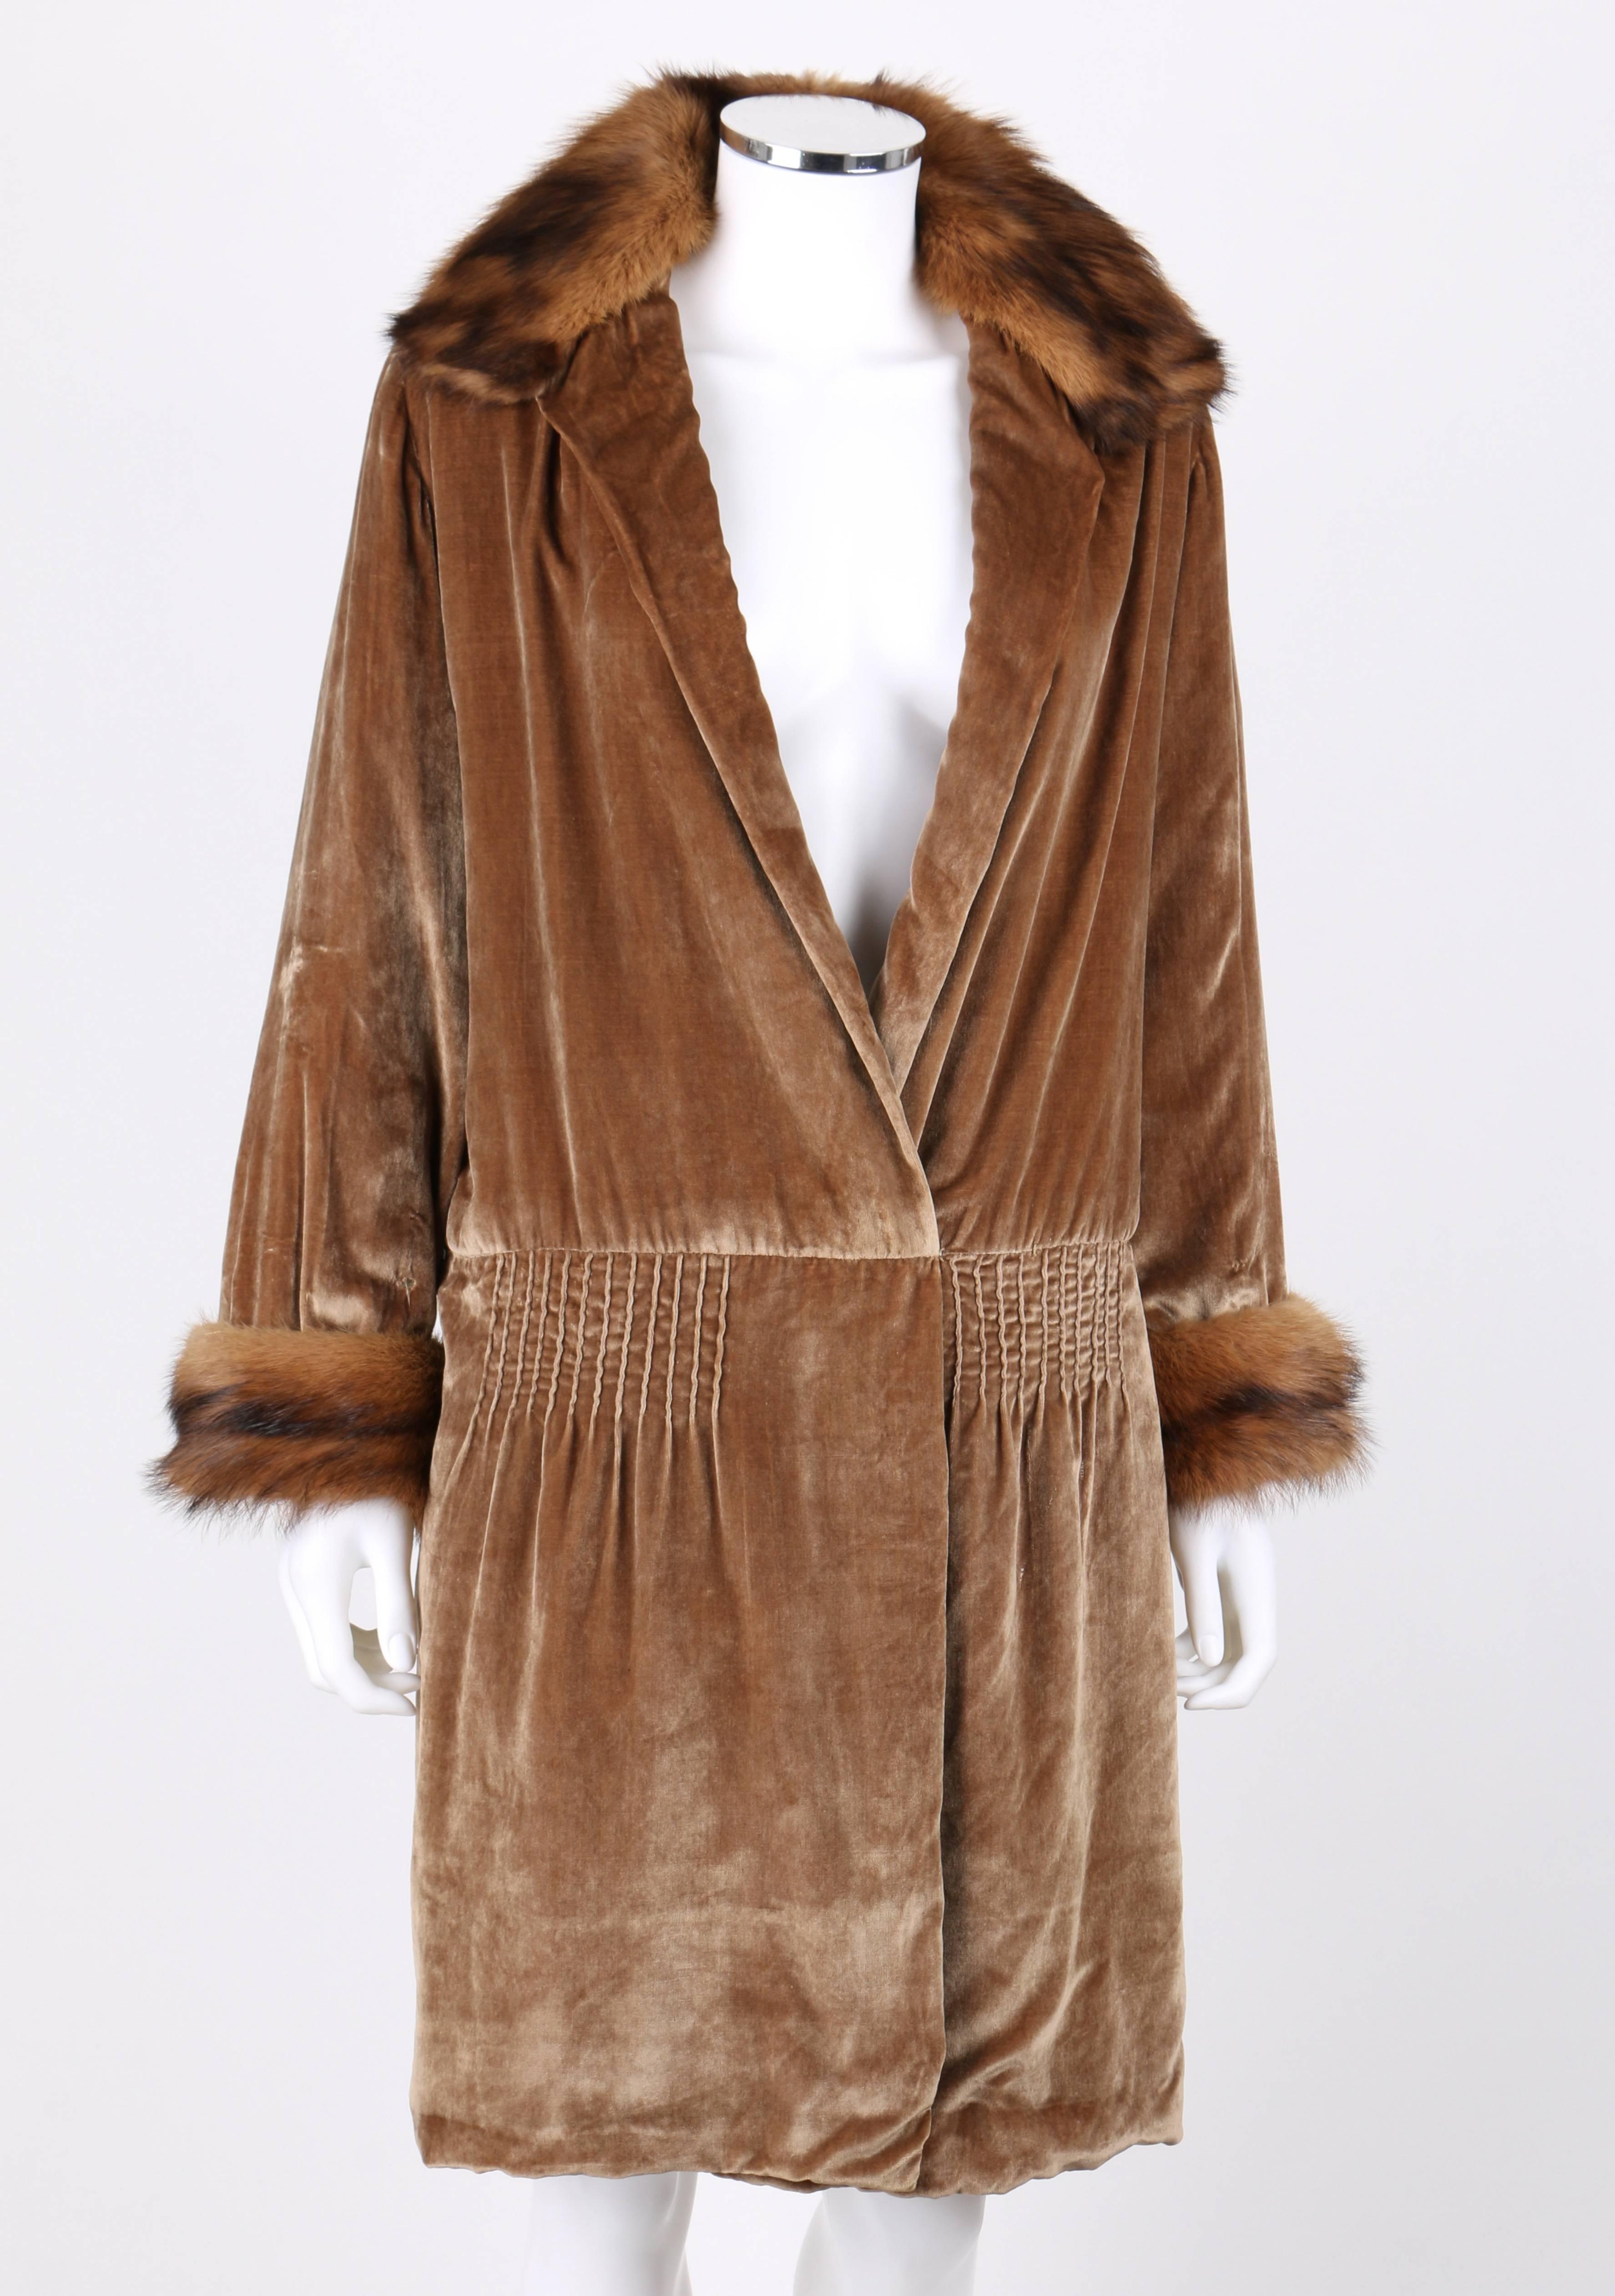 Vintage c.1920's Jean Patou couture bronze silk velvet fur trim flapper evening coat. Deep V-neckline with lapels. Long sleeves. Red fox fur trim at collar and cuffs. Drop waist with pinktuck detailing. Cross over button and hook/eye center front